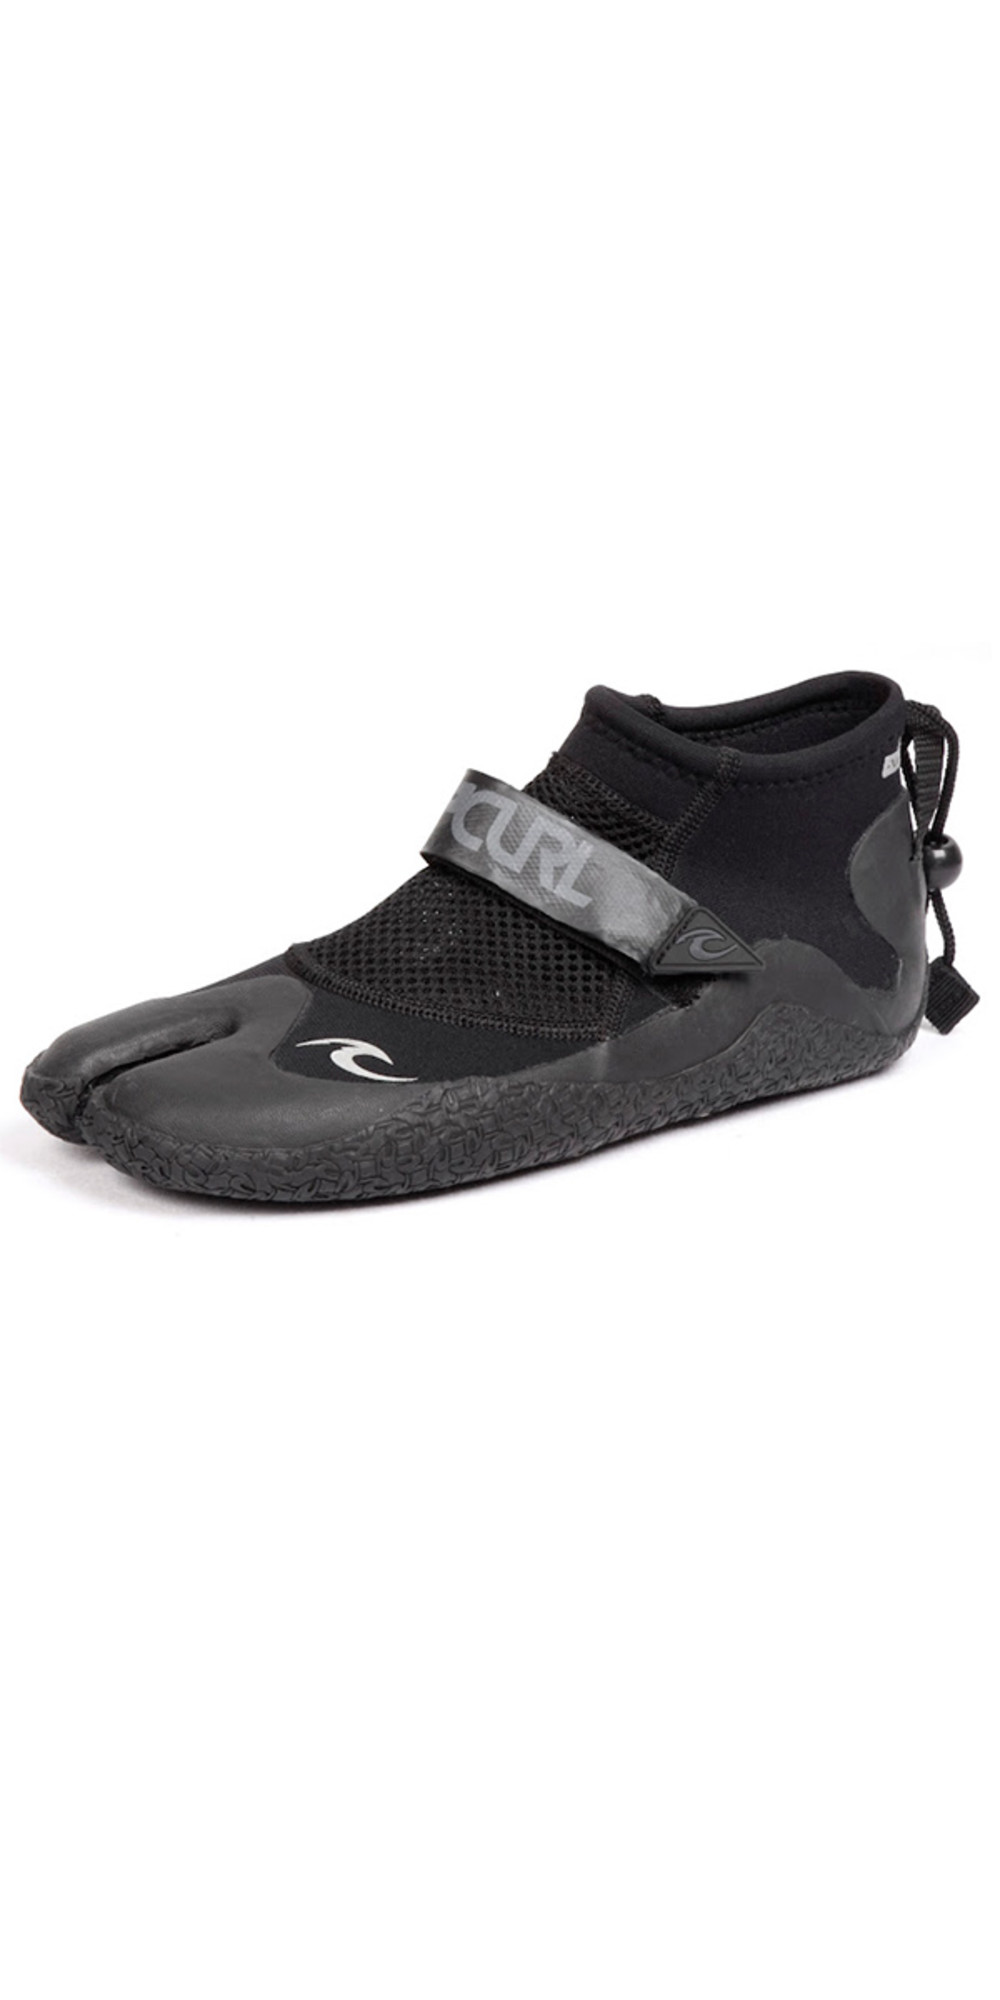 rip curl water shoes